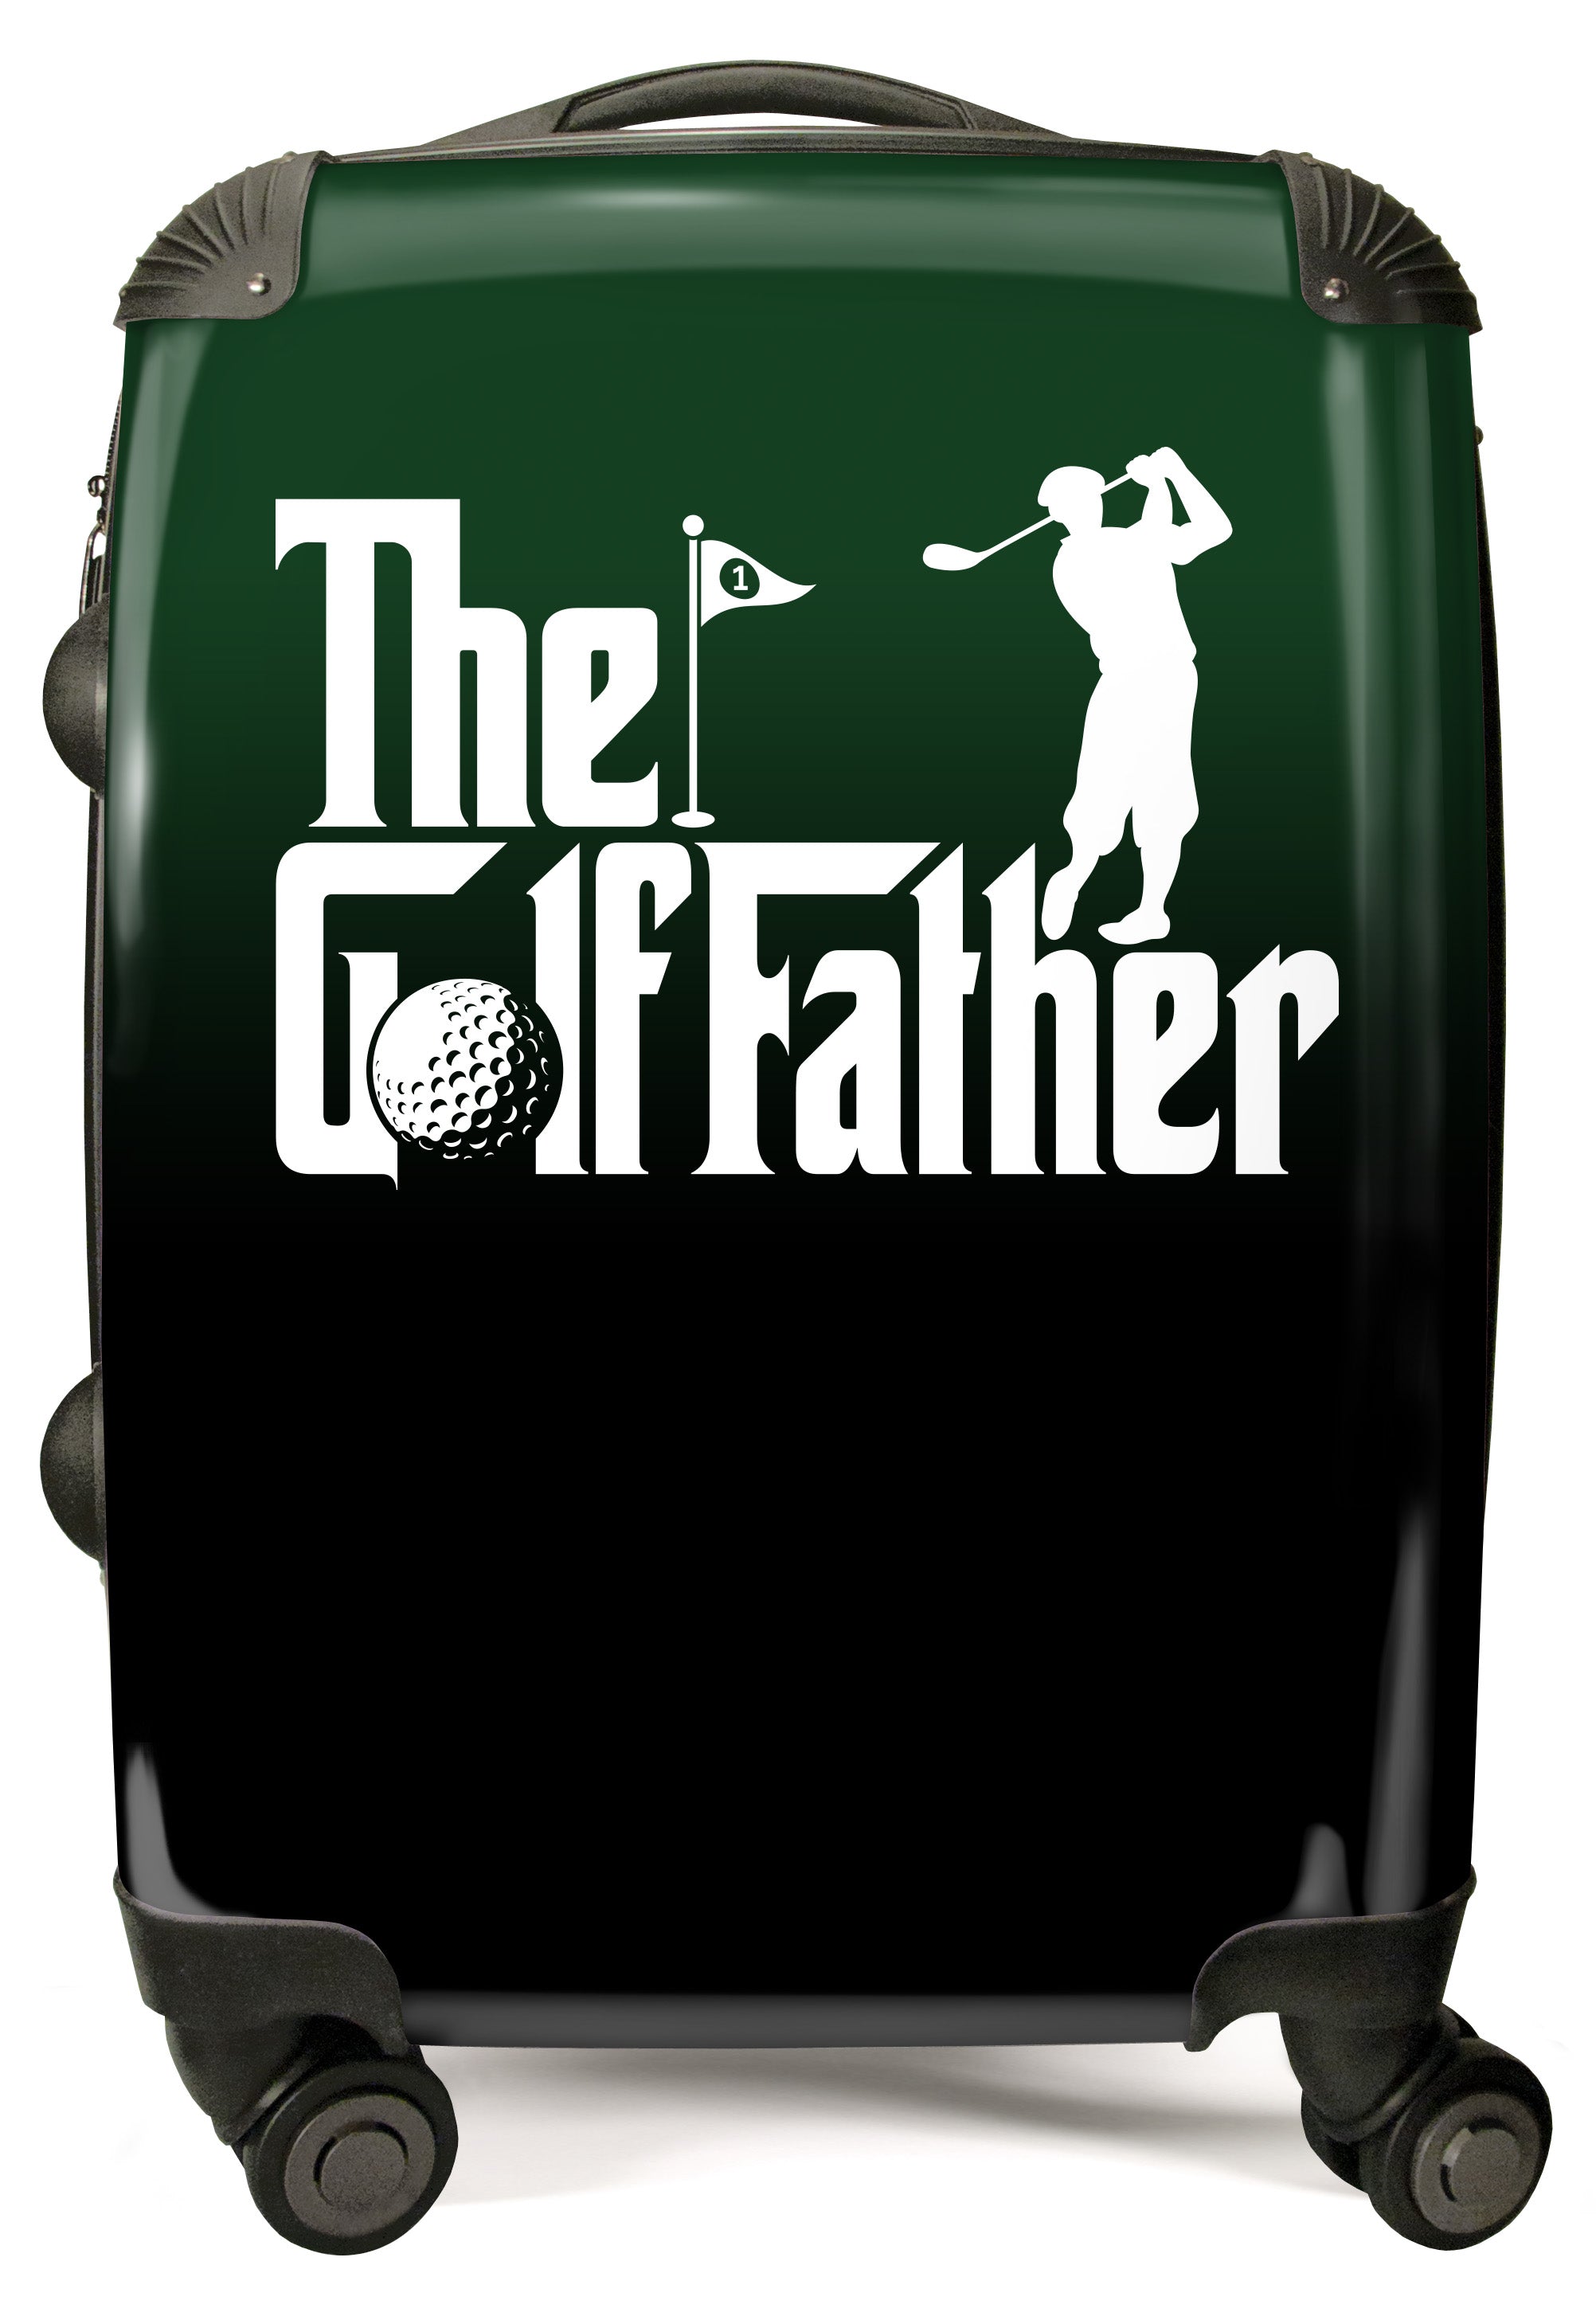 GREEN AND BLACK GOLF FATHER PRINT LUGGAGE